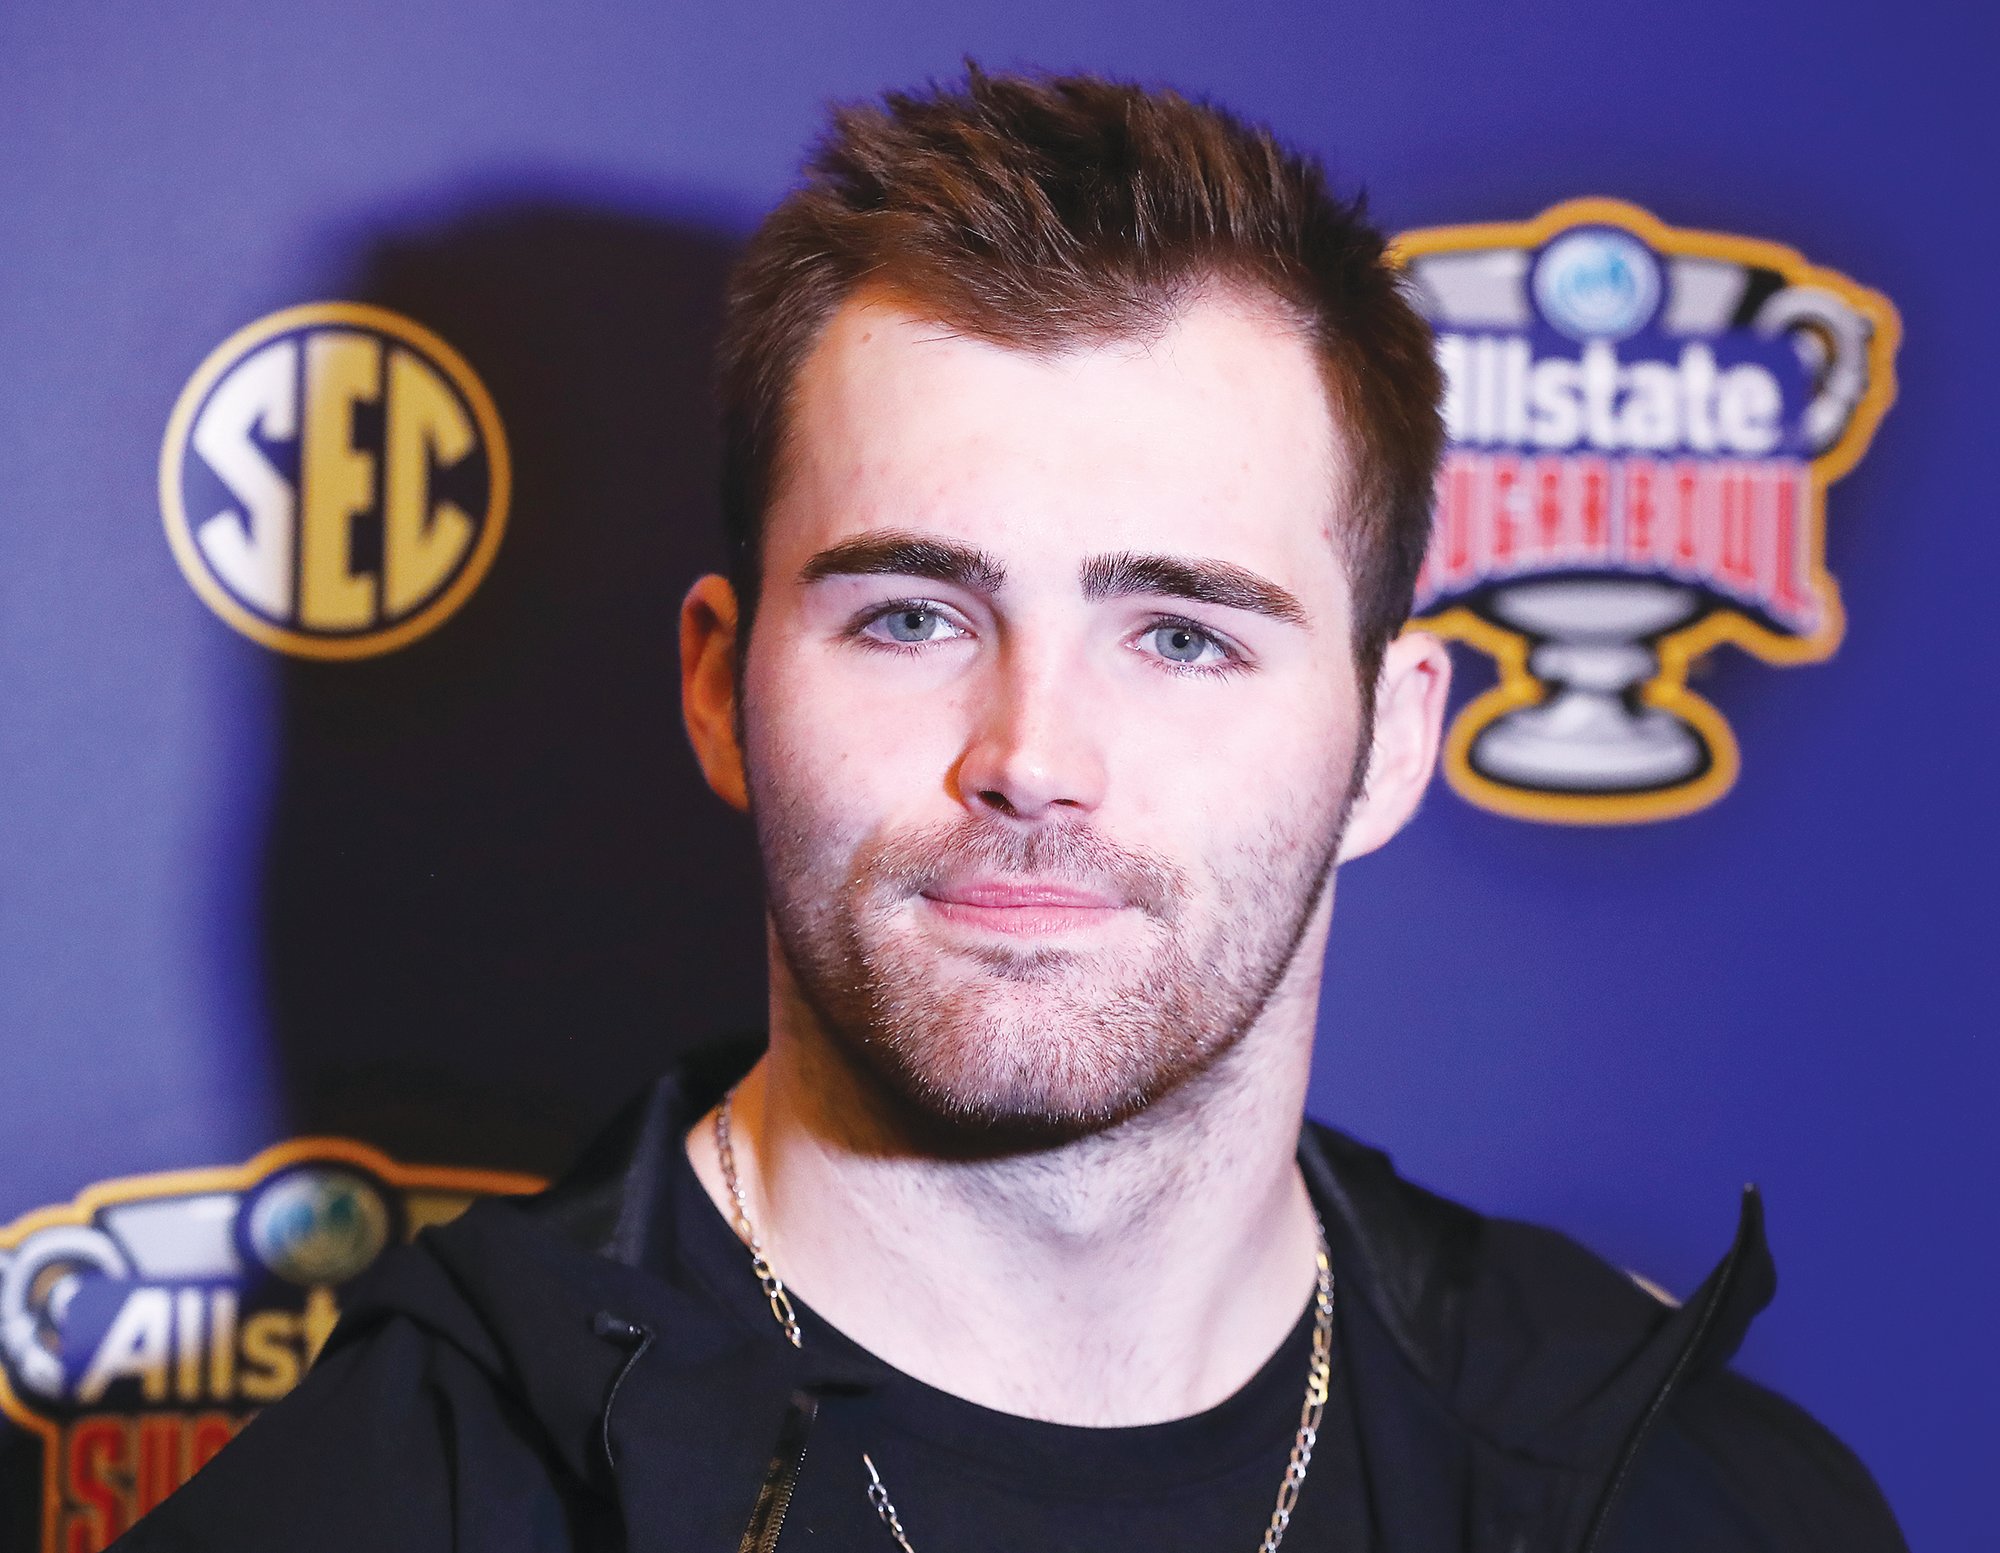 Georgia quarterback Jake Fromm takes questions from the media during the Georgia Offense Press Conference for the Sugar Bowl against Baylor on Sunday, December 29, 2019, in New Orleans.